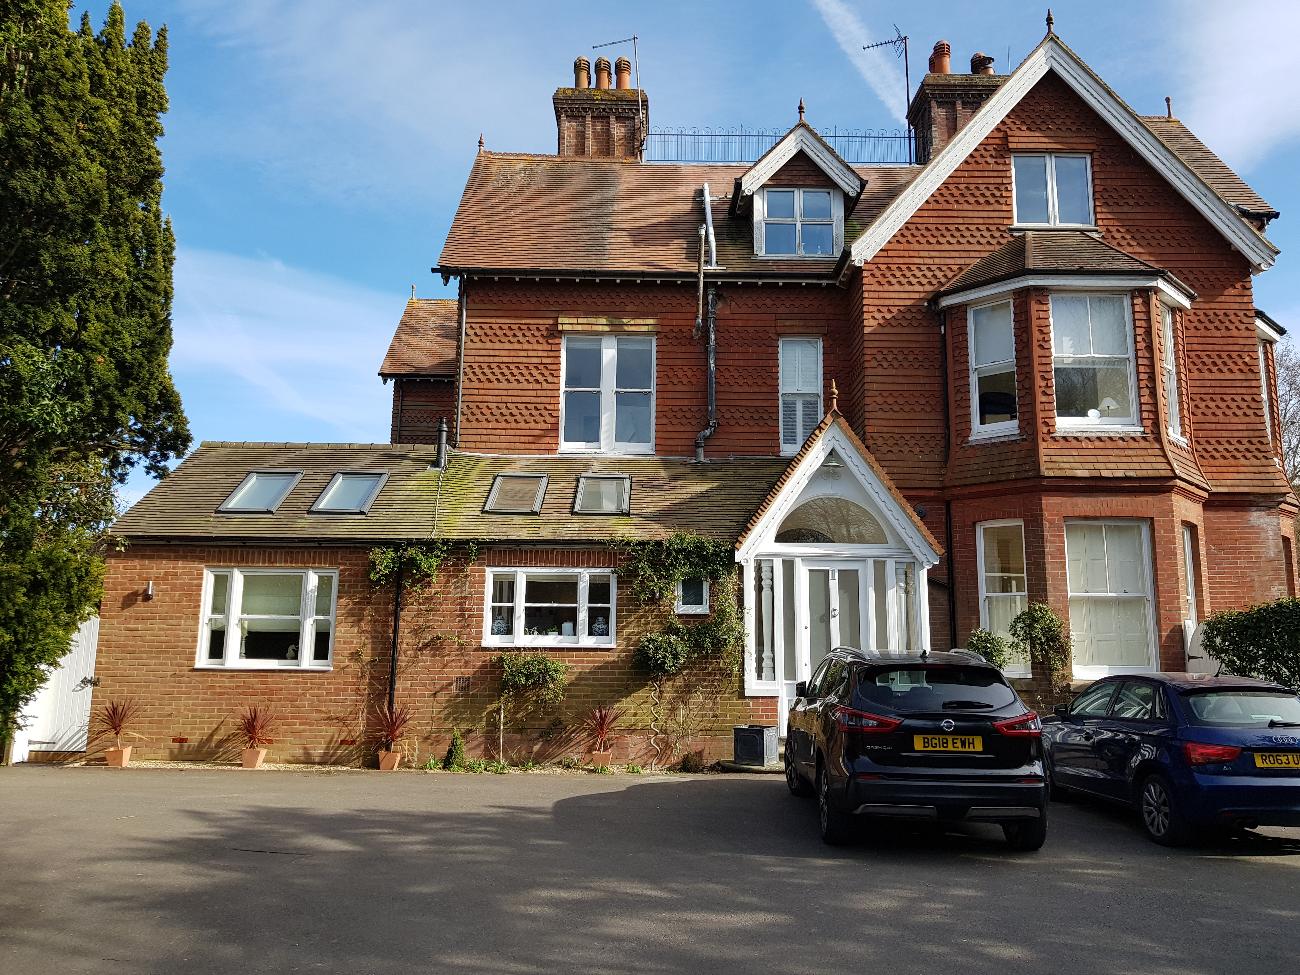 Gallery | Chartered Surveyor in Hurstpeirpoint and West Sussex gallery image 13